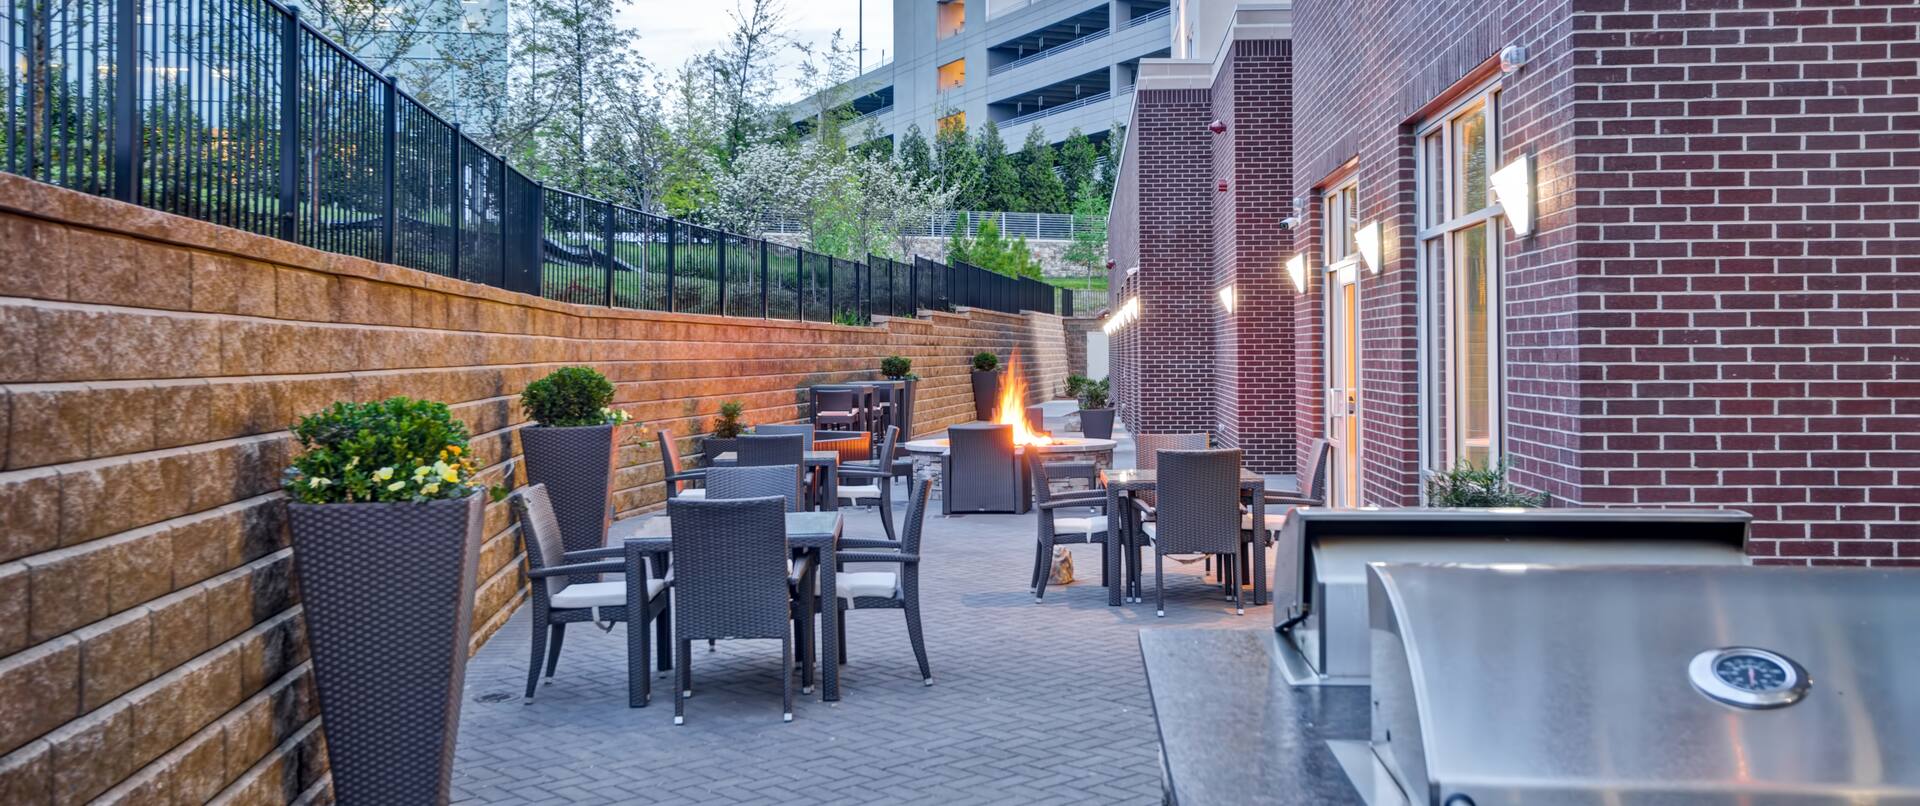 Outdoor Patio with BBQ